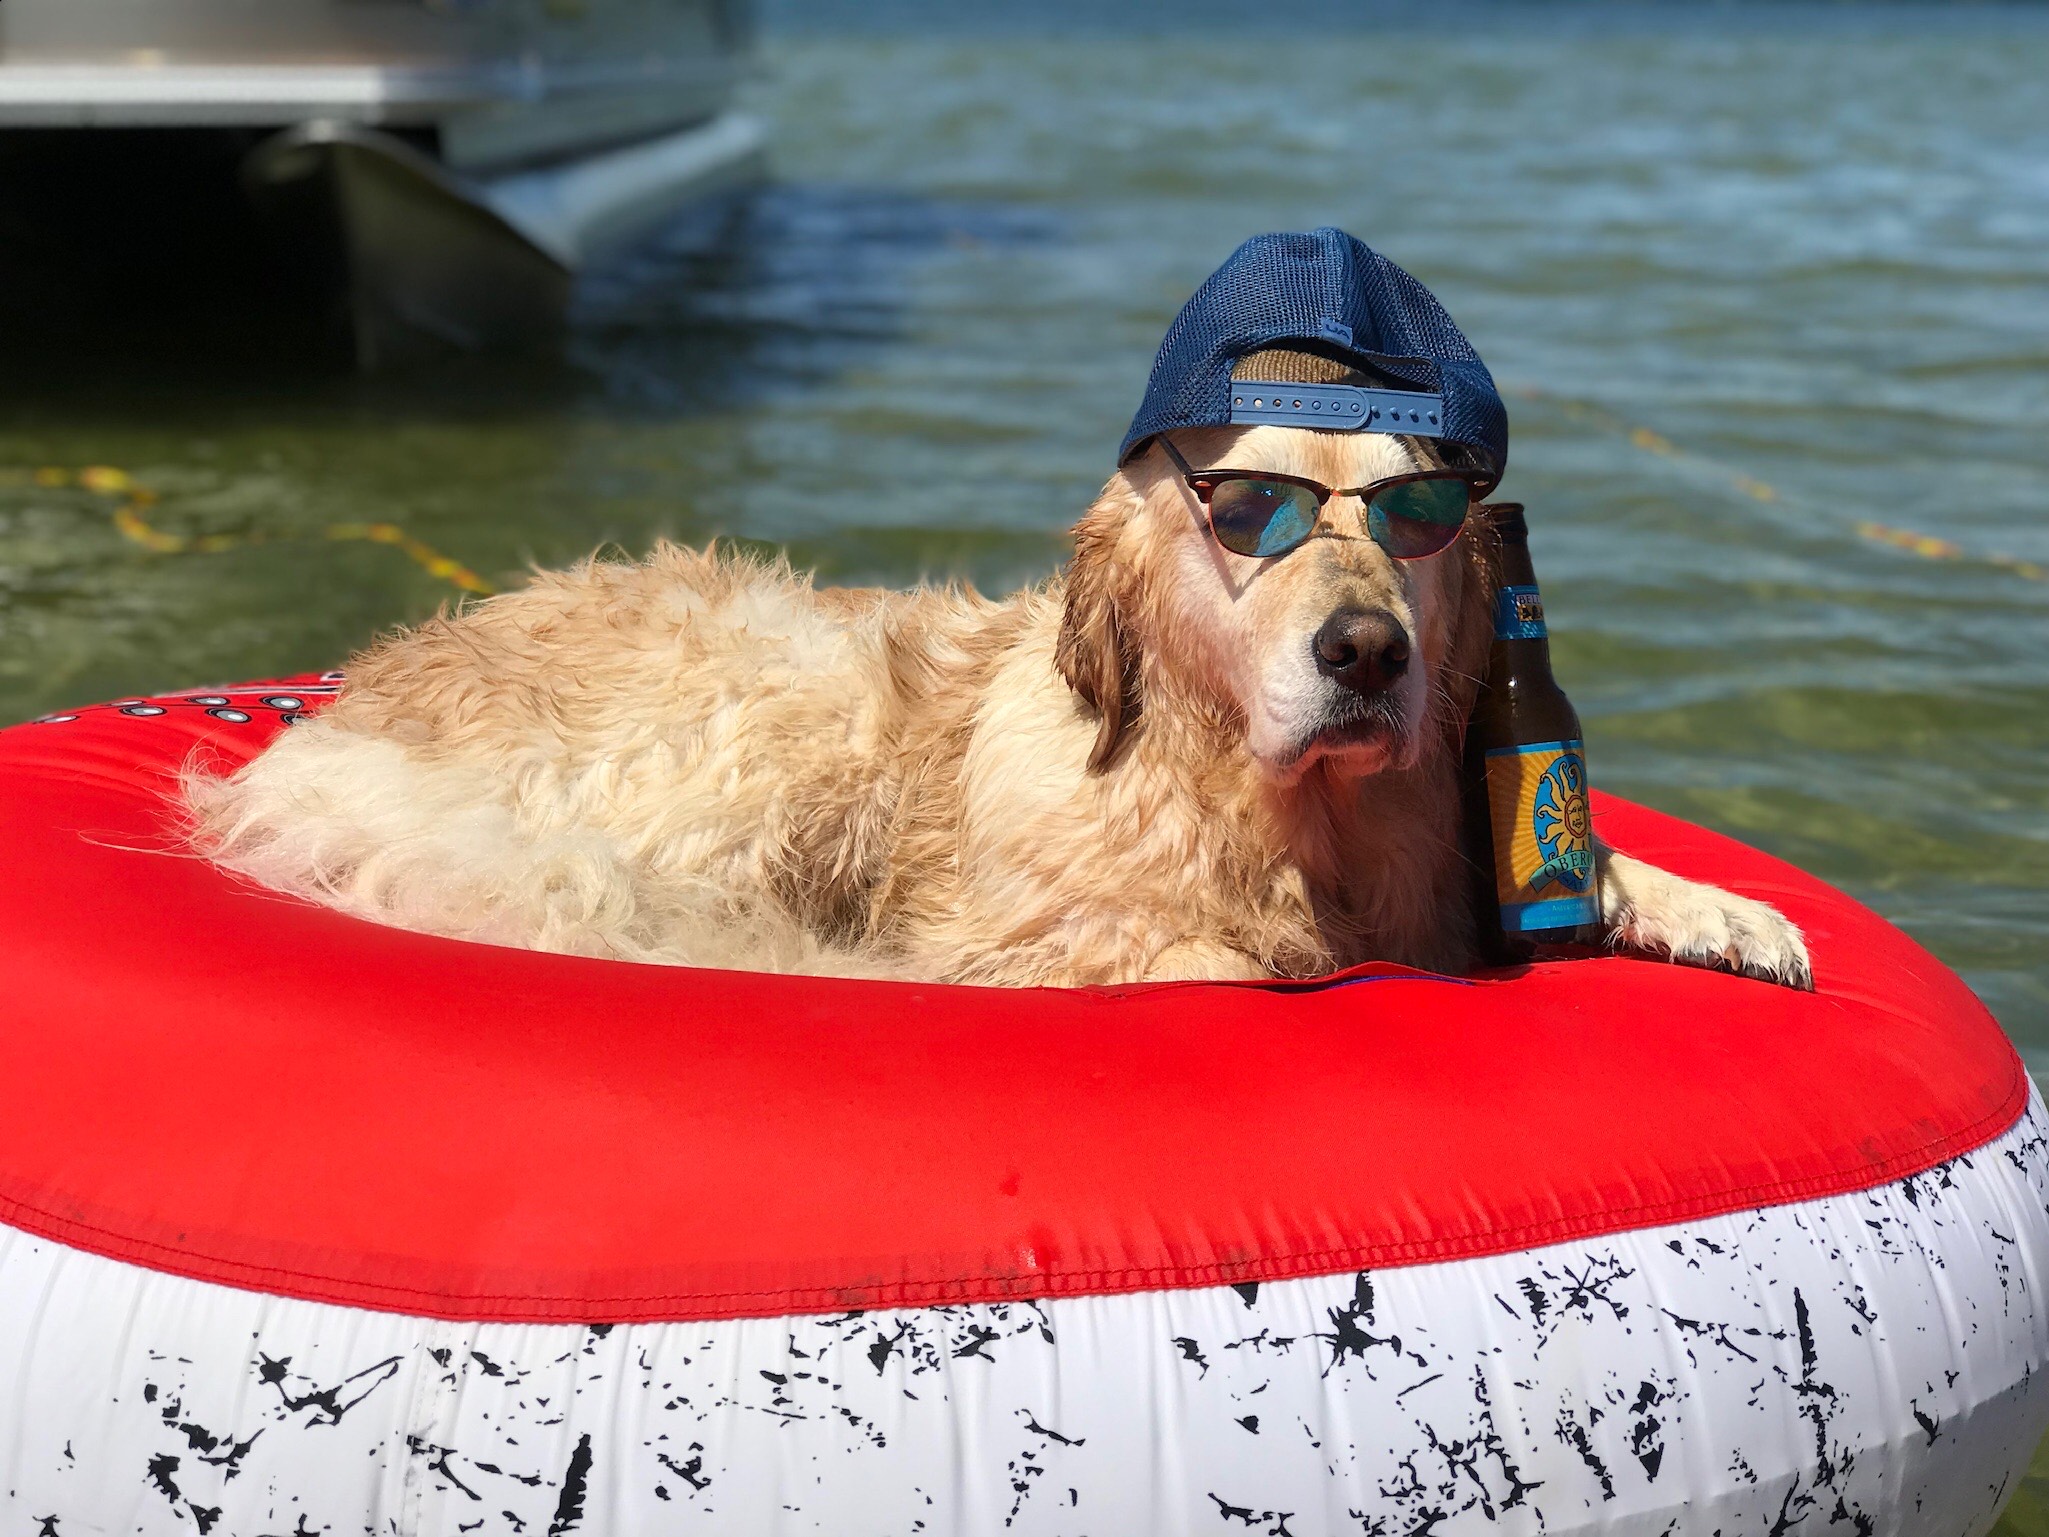 Meet Myla, The Adorable Dog That Falls Asleep In The Pool Every Day